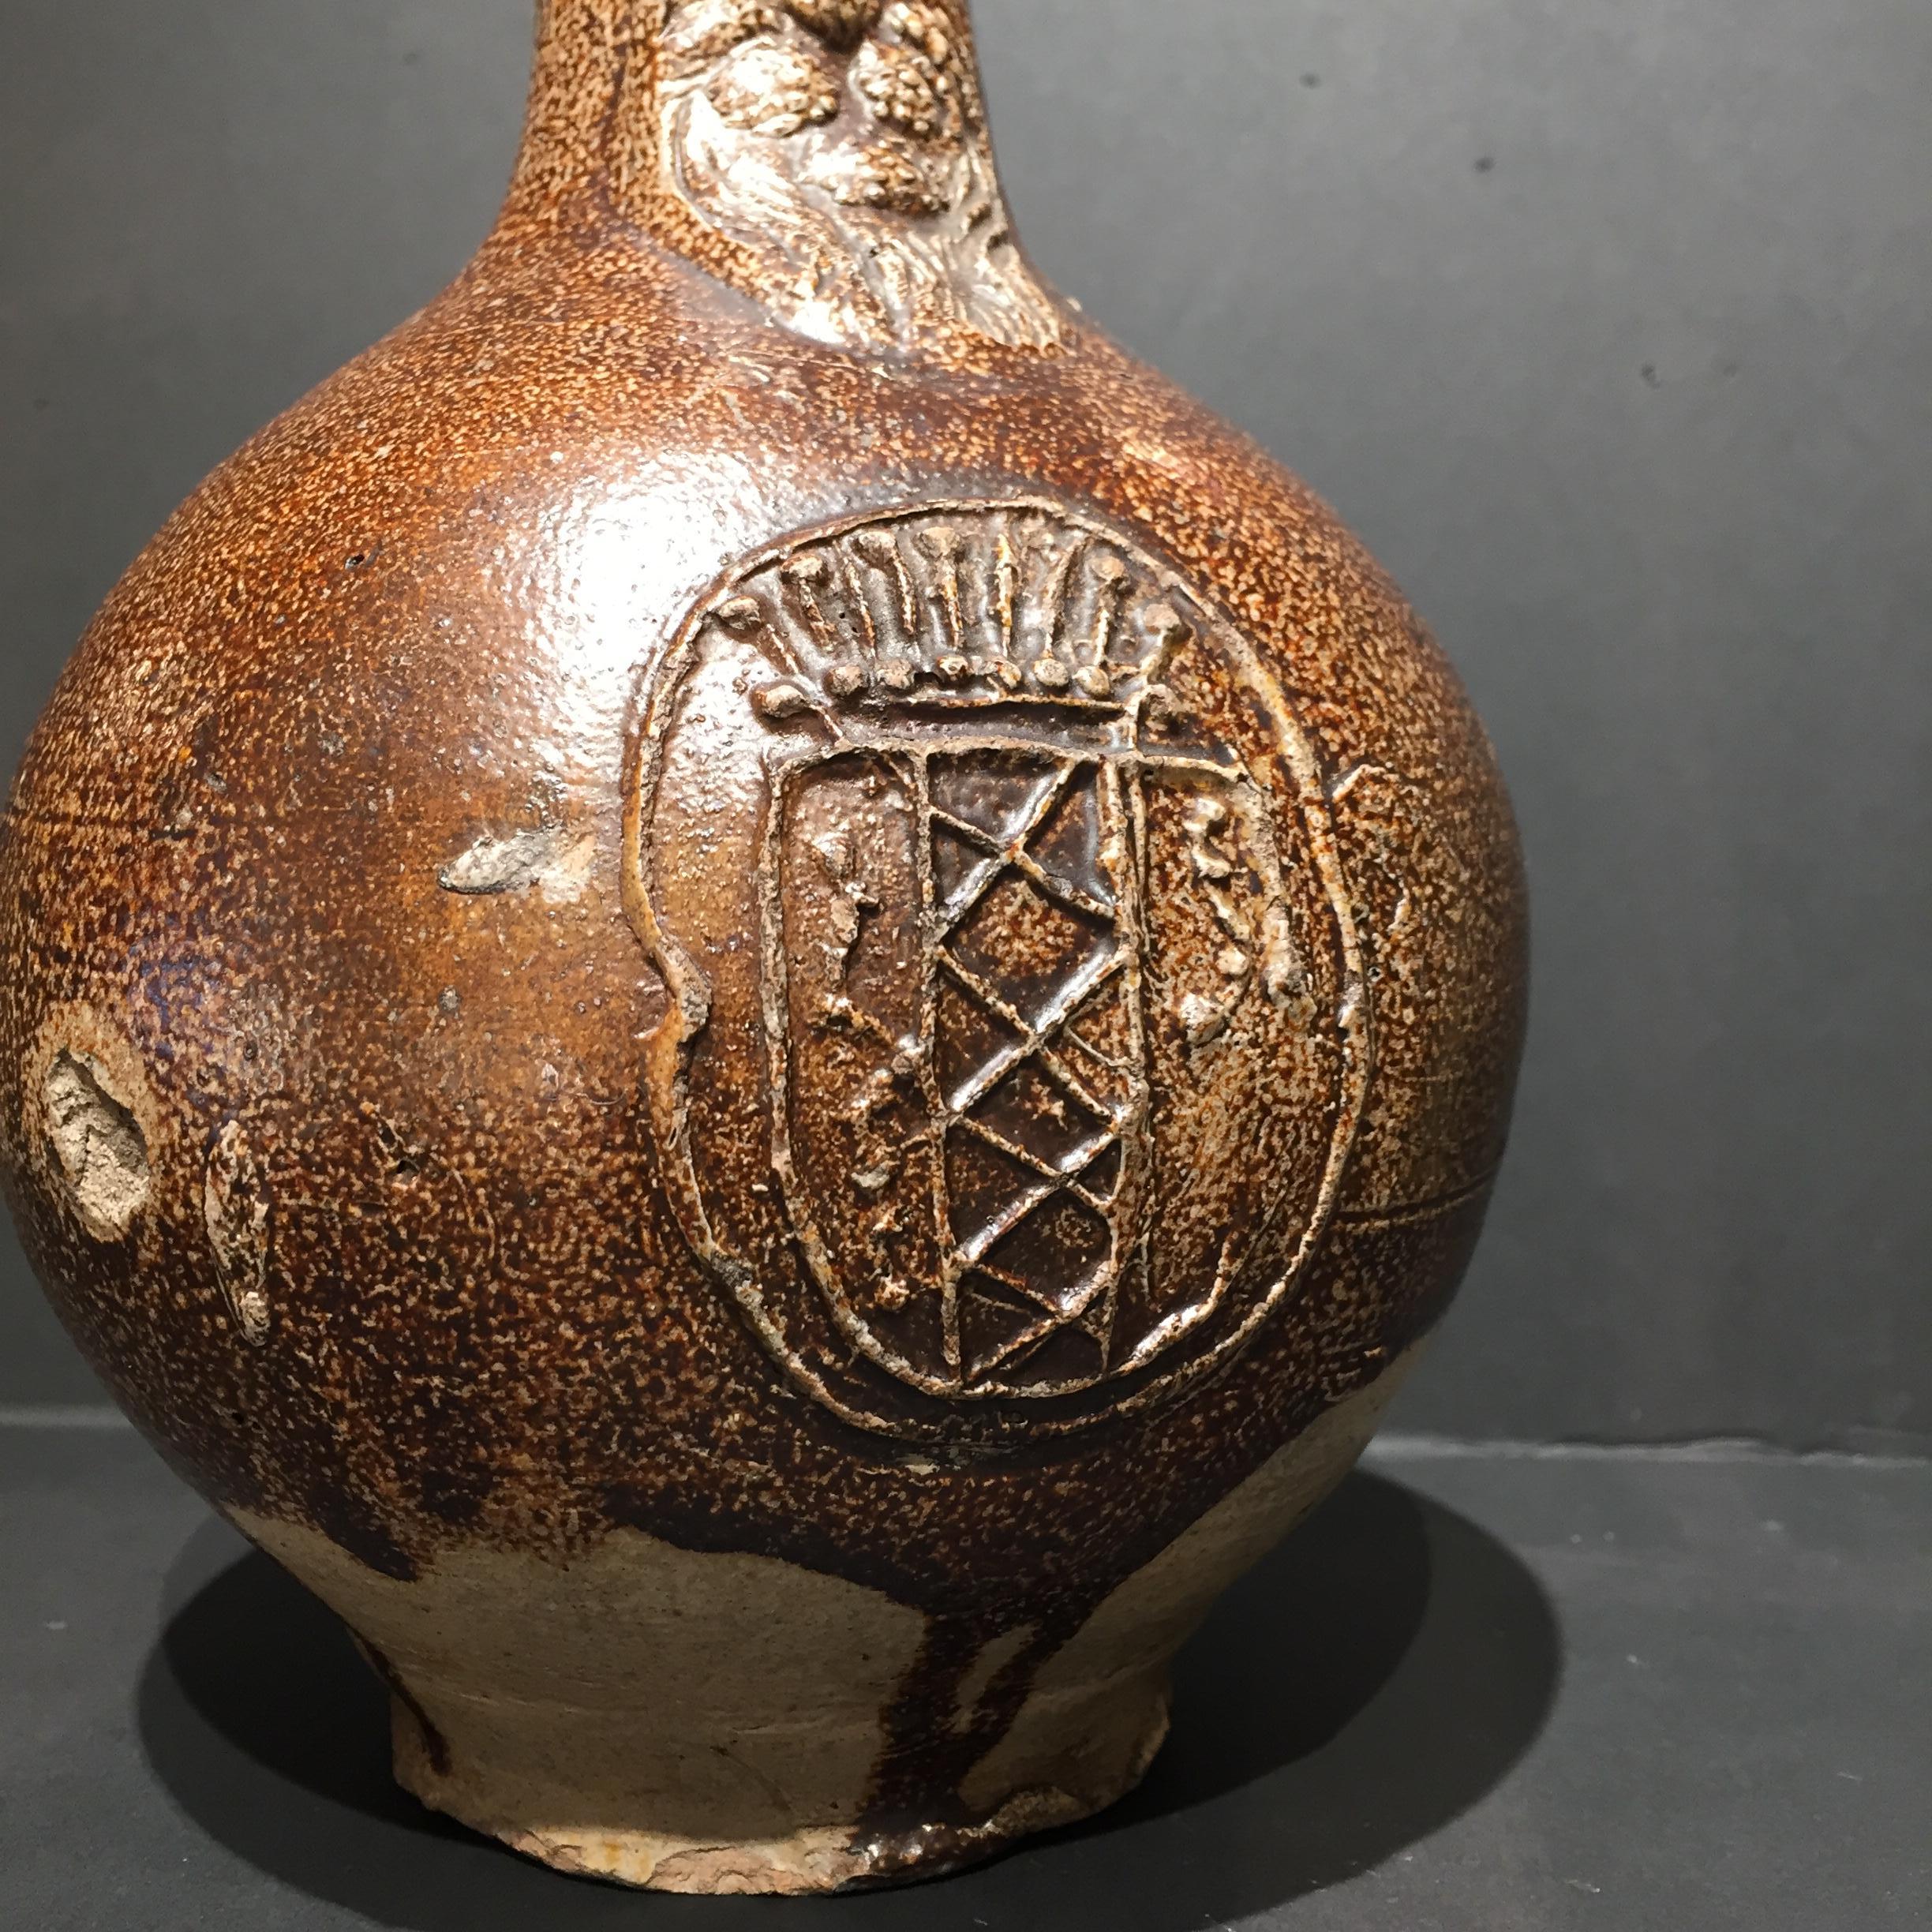 Germany
Frechen
Circa 1620 – 1640

Bellarmine or Bartmann jug with a coat of arms.

A salt-glazed and iron-engobed bellarmine with a narrow neck, spherical body, and flat base. A stylized face with a closed mouth and a long round beard is applied to